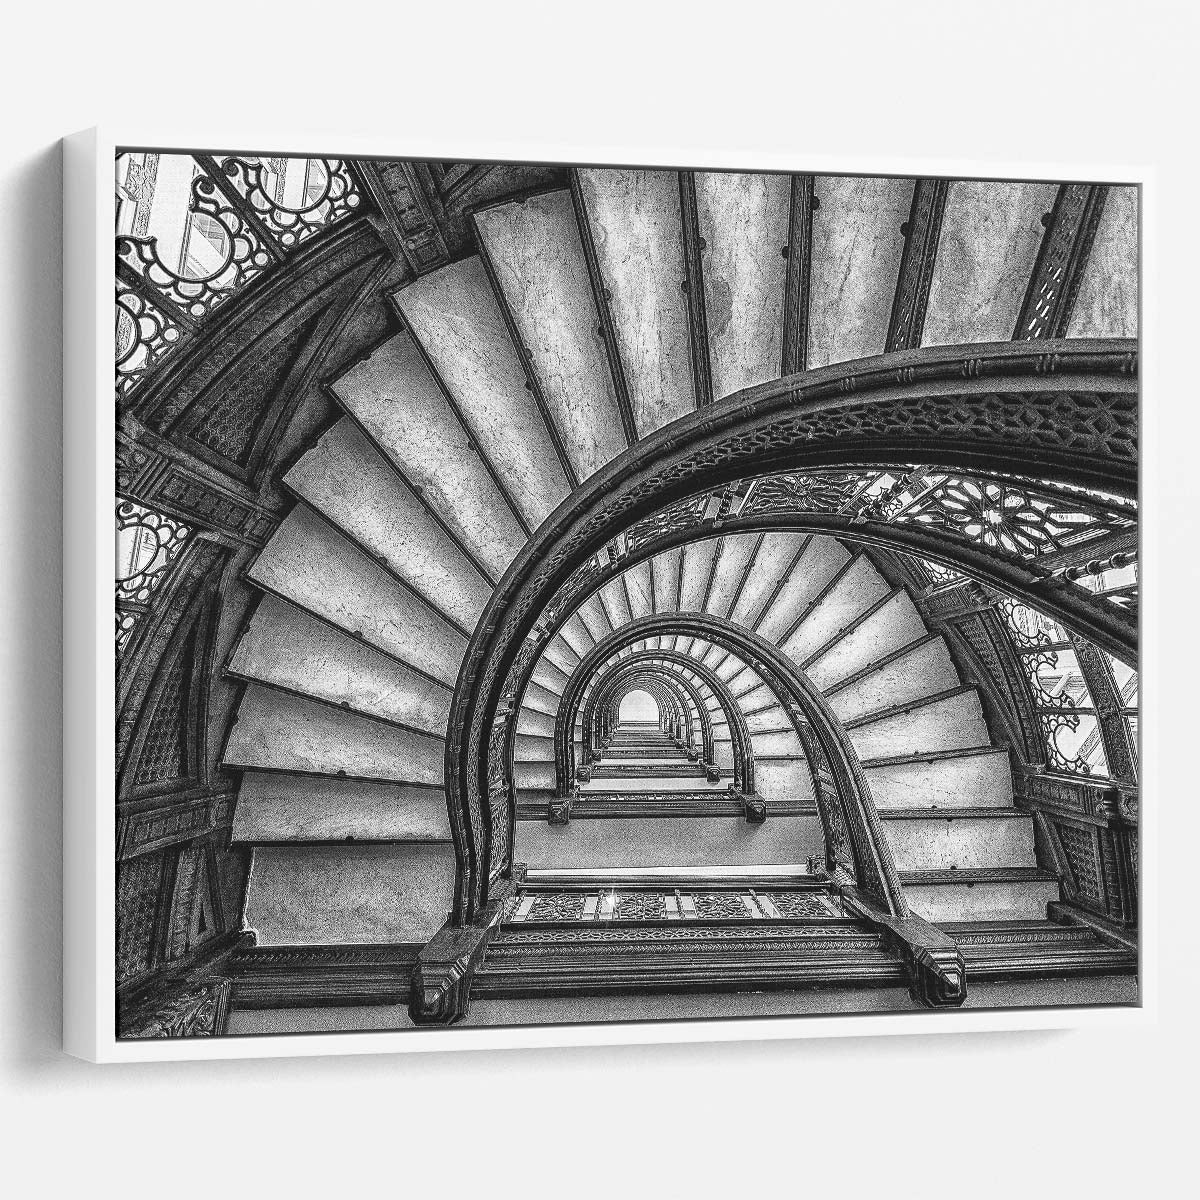 Vintage Chicago Rookery Spiral Stairs Black and White Photography Wall Art